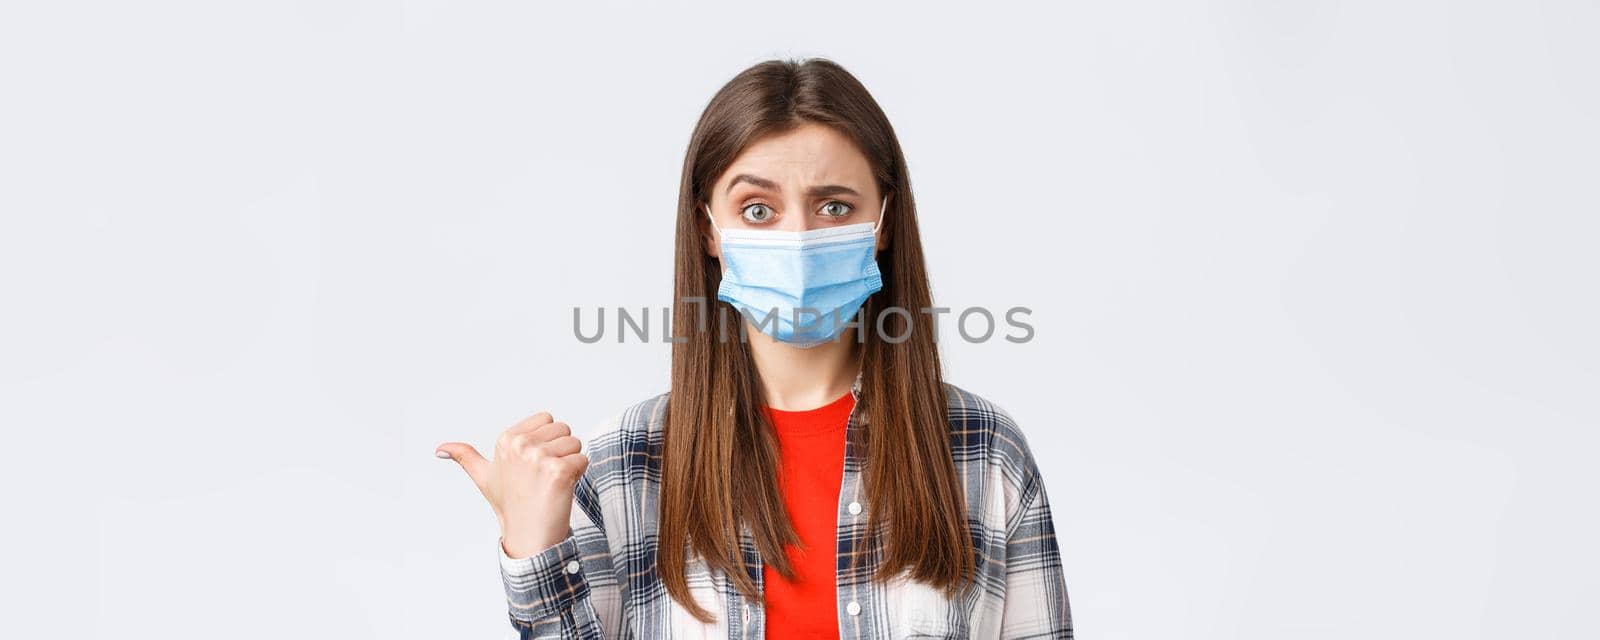 Coronavirus outbreak, leisure on quarantine, social distancing and emotions concept. Skeptical, unimpressed pretty woman in medical mask pointing thumb left and frowning doubtful.